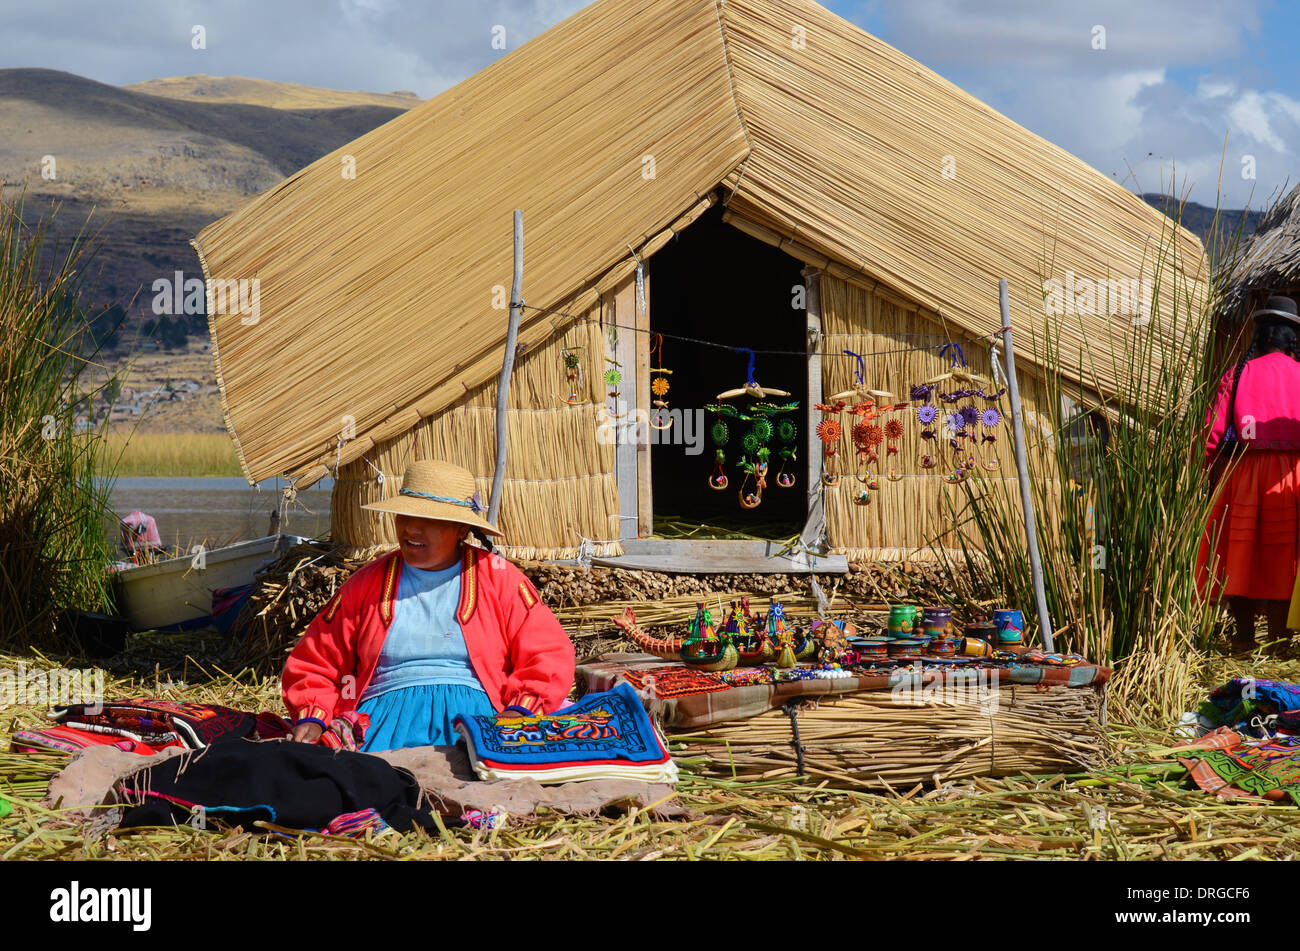 LAKE TITICACA, PERU - AUGUST 3: Uros Indian woman peddling her wares on a reed island in Lake Titicaca August 3, 2013. Stock Photo